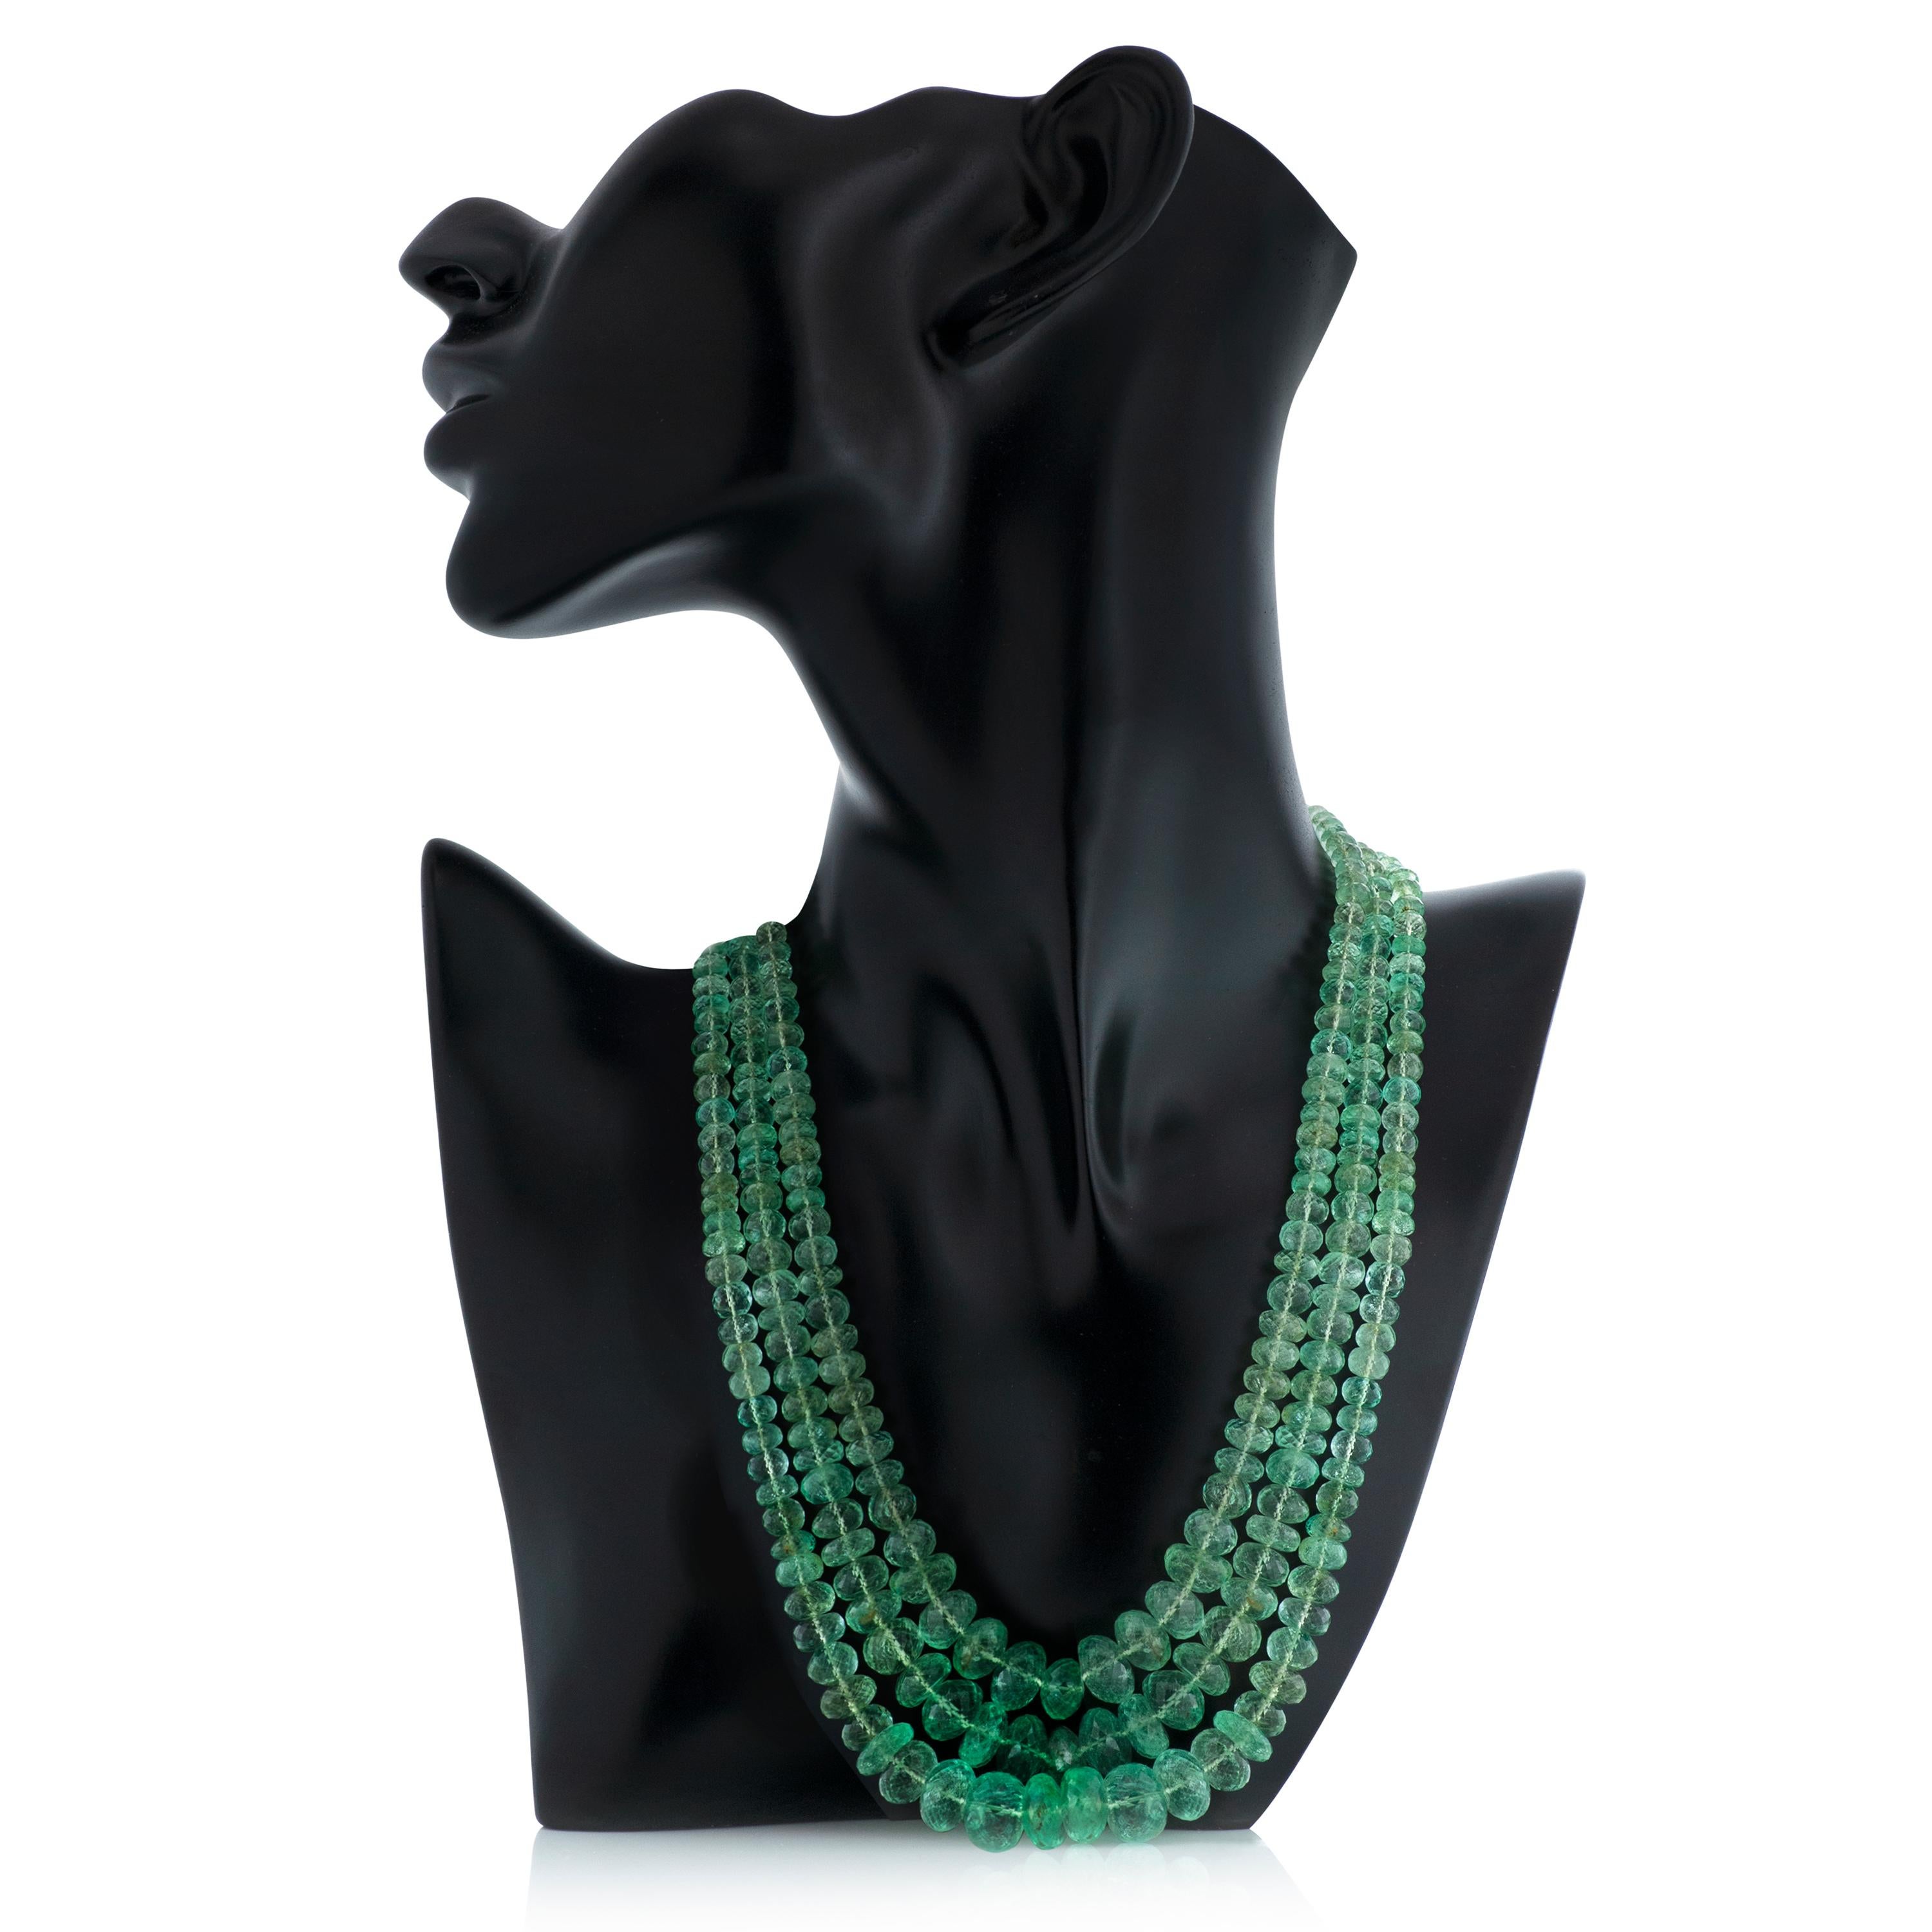 Vintage Seaman Schepps multi-strand faceted green beryl bead necklace with 18k yellow gold and diamond clasp.

This necklace features 3 strands of faceted green beryl beads graduating from approximately 5mm to 12.5mm.  The clasp contains 7 round